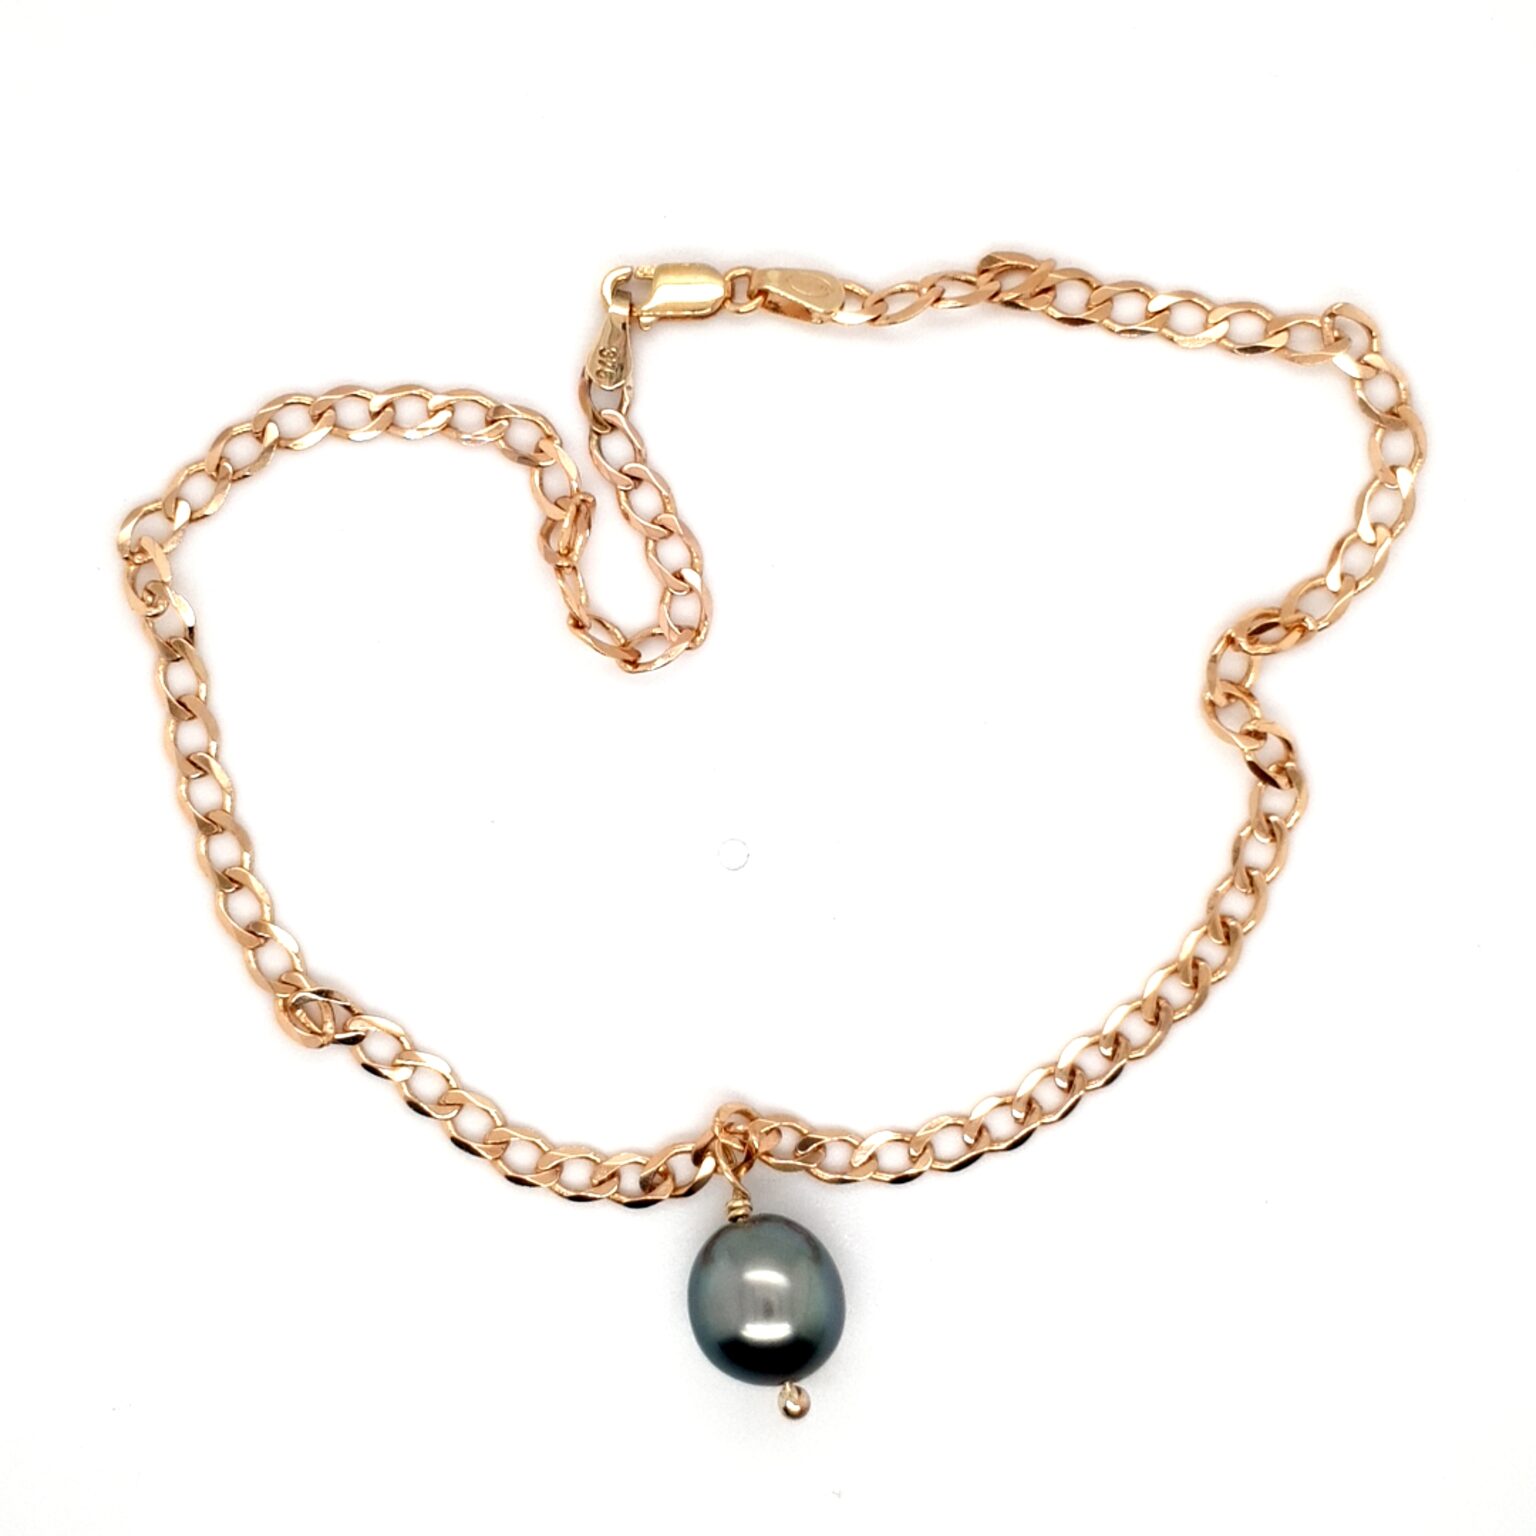 Leon Baker 9K Yellow Gold Curb Chain Anklet with Abrolhos Pearl_1